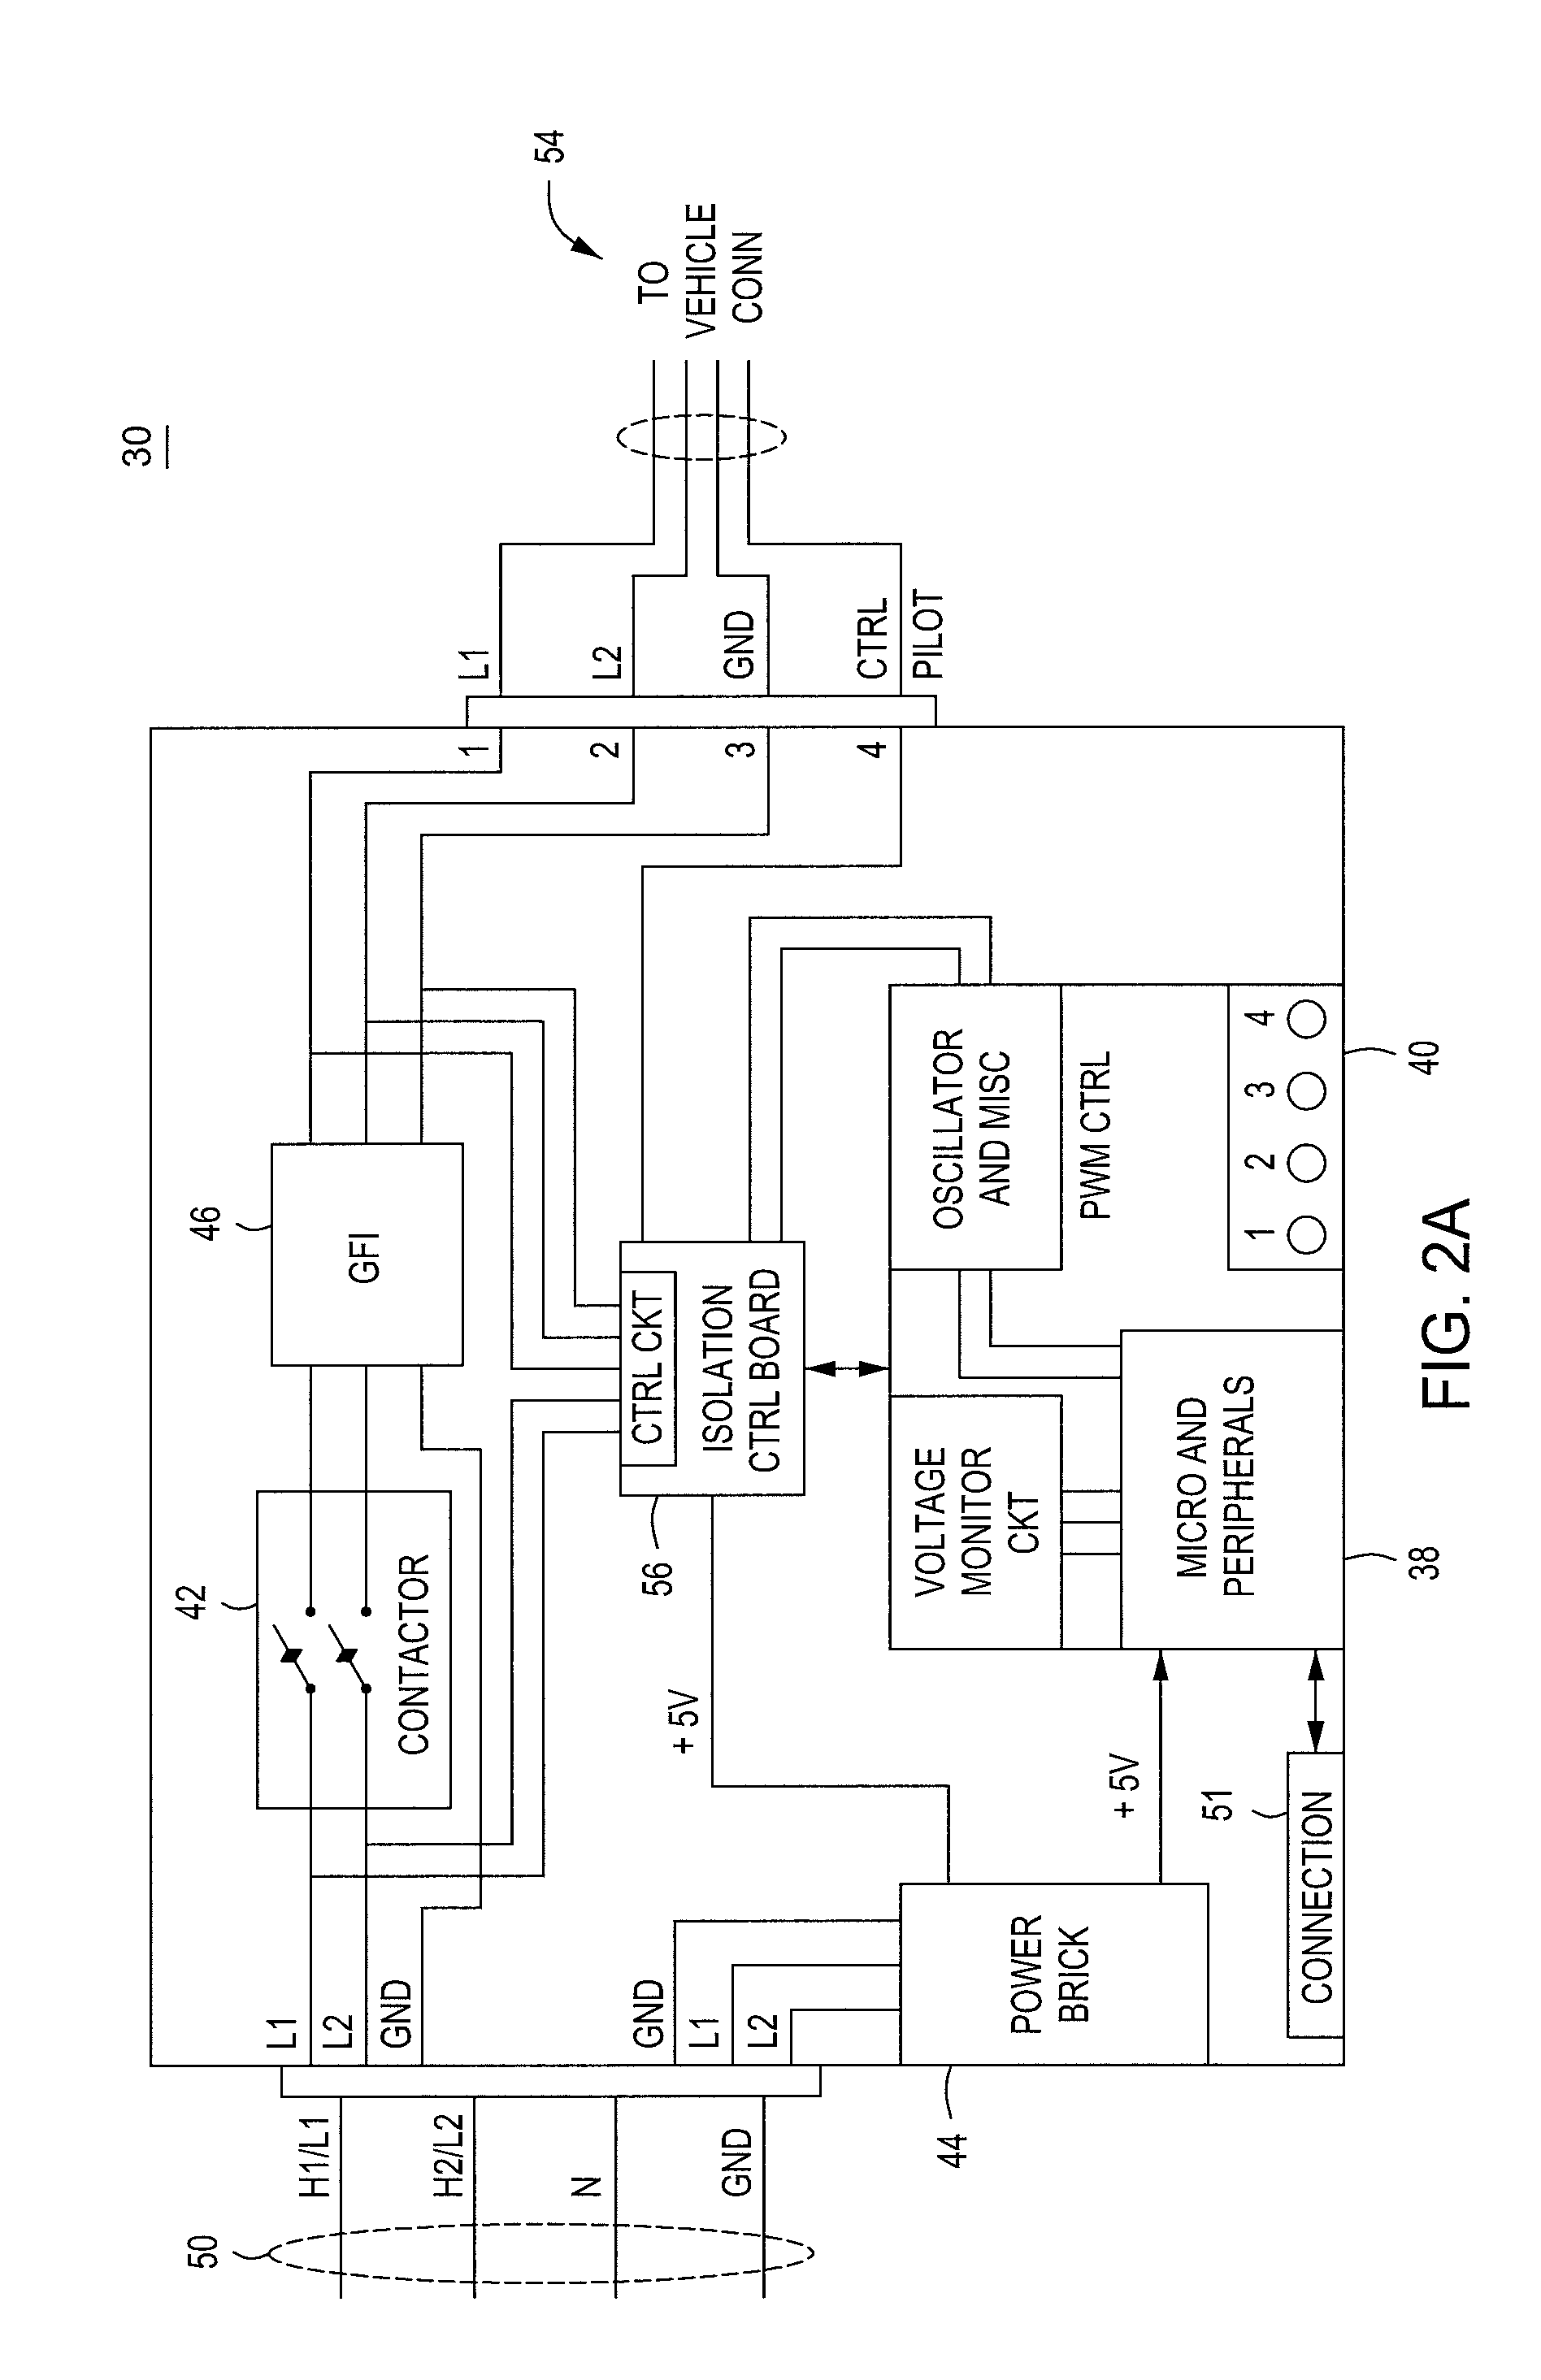 Smart phone control and notification for an electric vehicle charging station